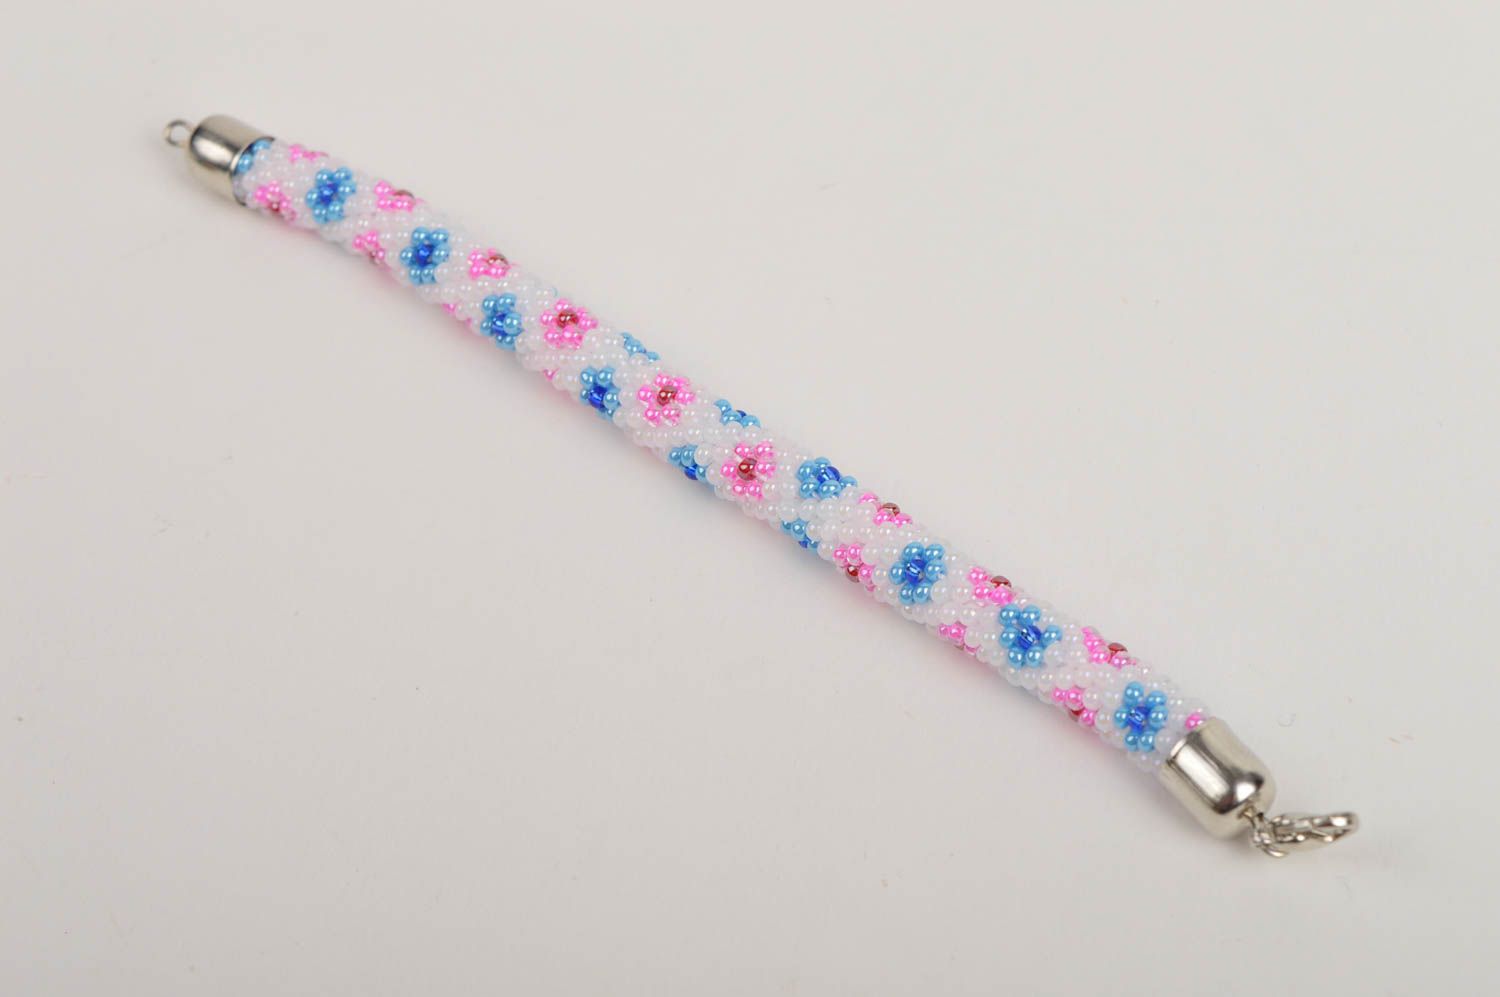 Handmade beaded bracelet cord with blue and pink flowers for girls photo 2